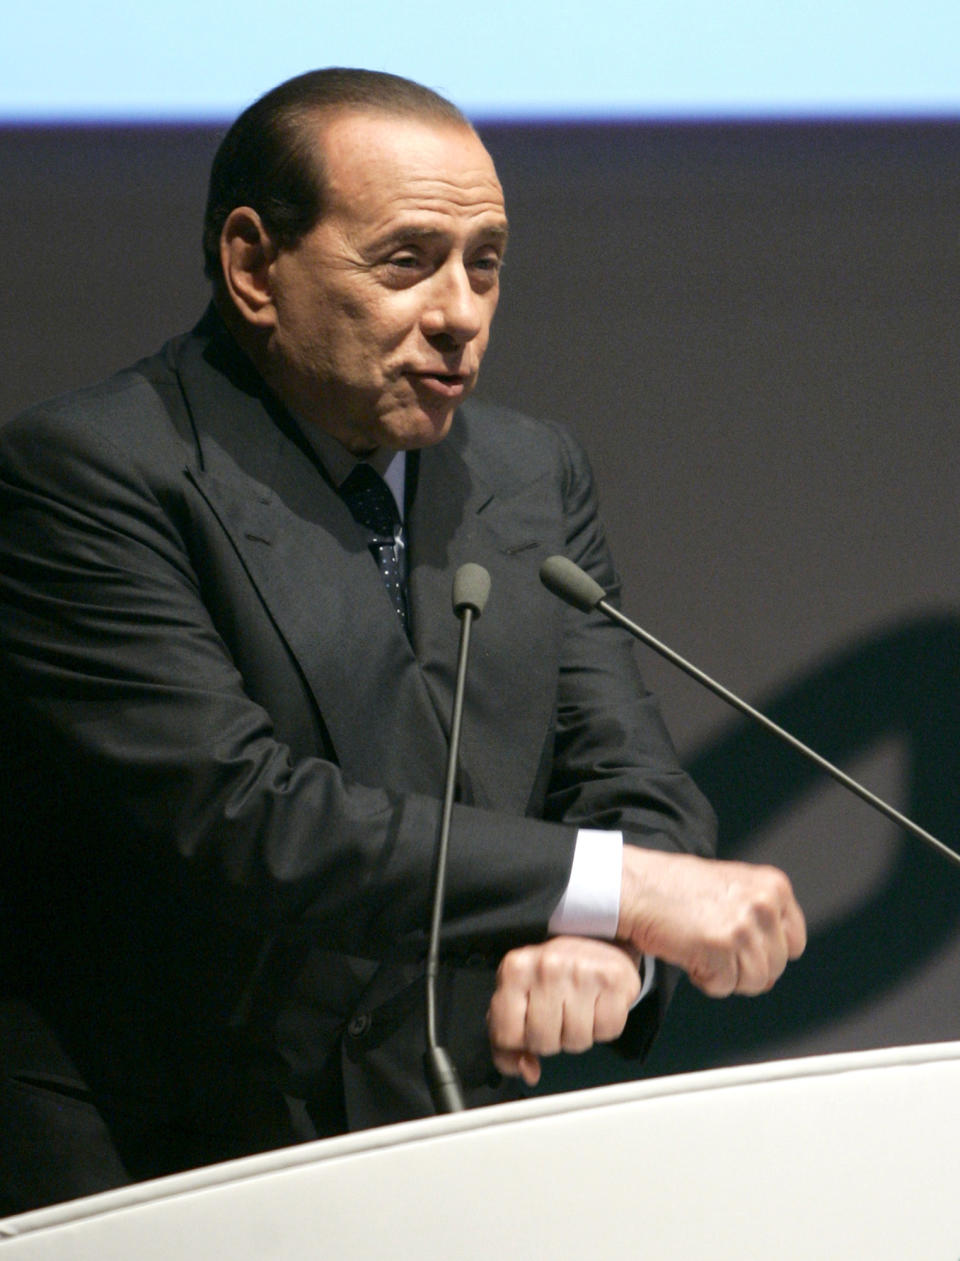 FILE -- In this file photo taken on June 25, 2008, Silvio Berlusconi, then Italian Premier, gestures miming handcuffs as he speaks during the Confesercenti traders association's annual assembly in Rome. Just when Silvio Berlusoni hopes to run for office after being sidelined for a tax-fraud conviction, a Milan judge has ordered him to be tried on corruption charges. (AP Photo/Riccardo De Luca)